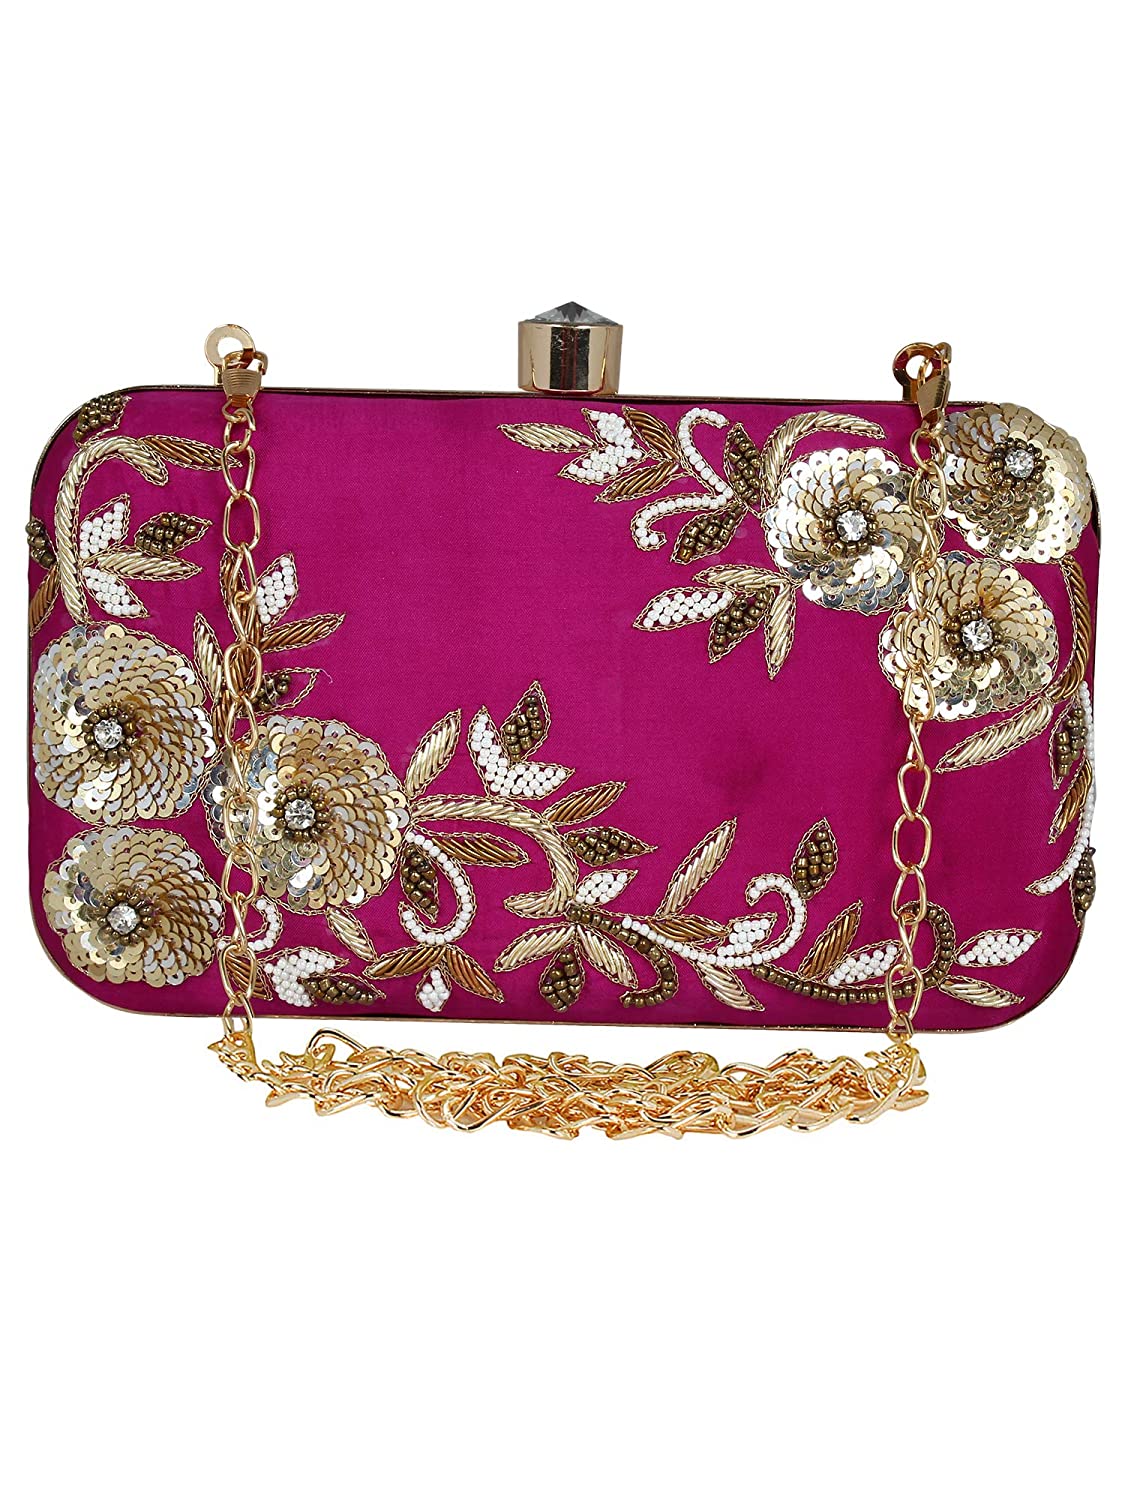 Women's Purple Color Adorn Embroidered & Embelished Party Clutch - VASTANS